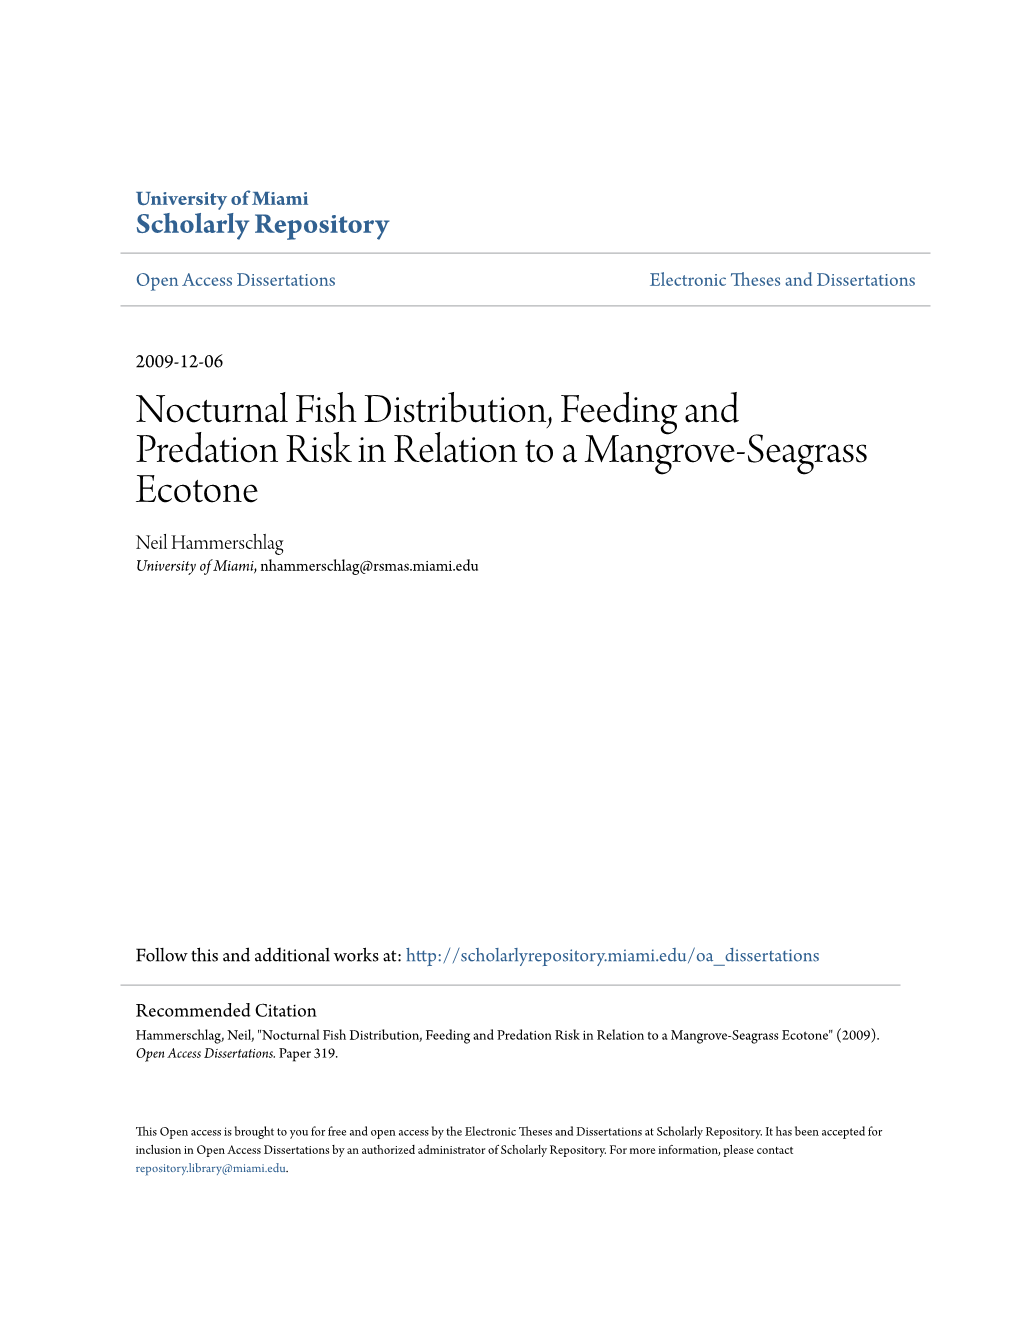 Nocturnal Fish Distribution, Feeding and Predation Risk in Relation to a Mangrove-Seagrass Ecotone